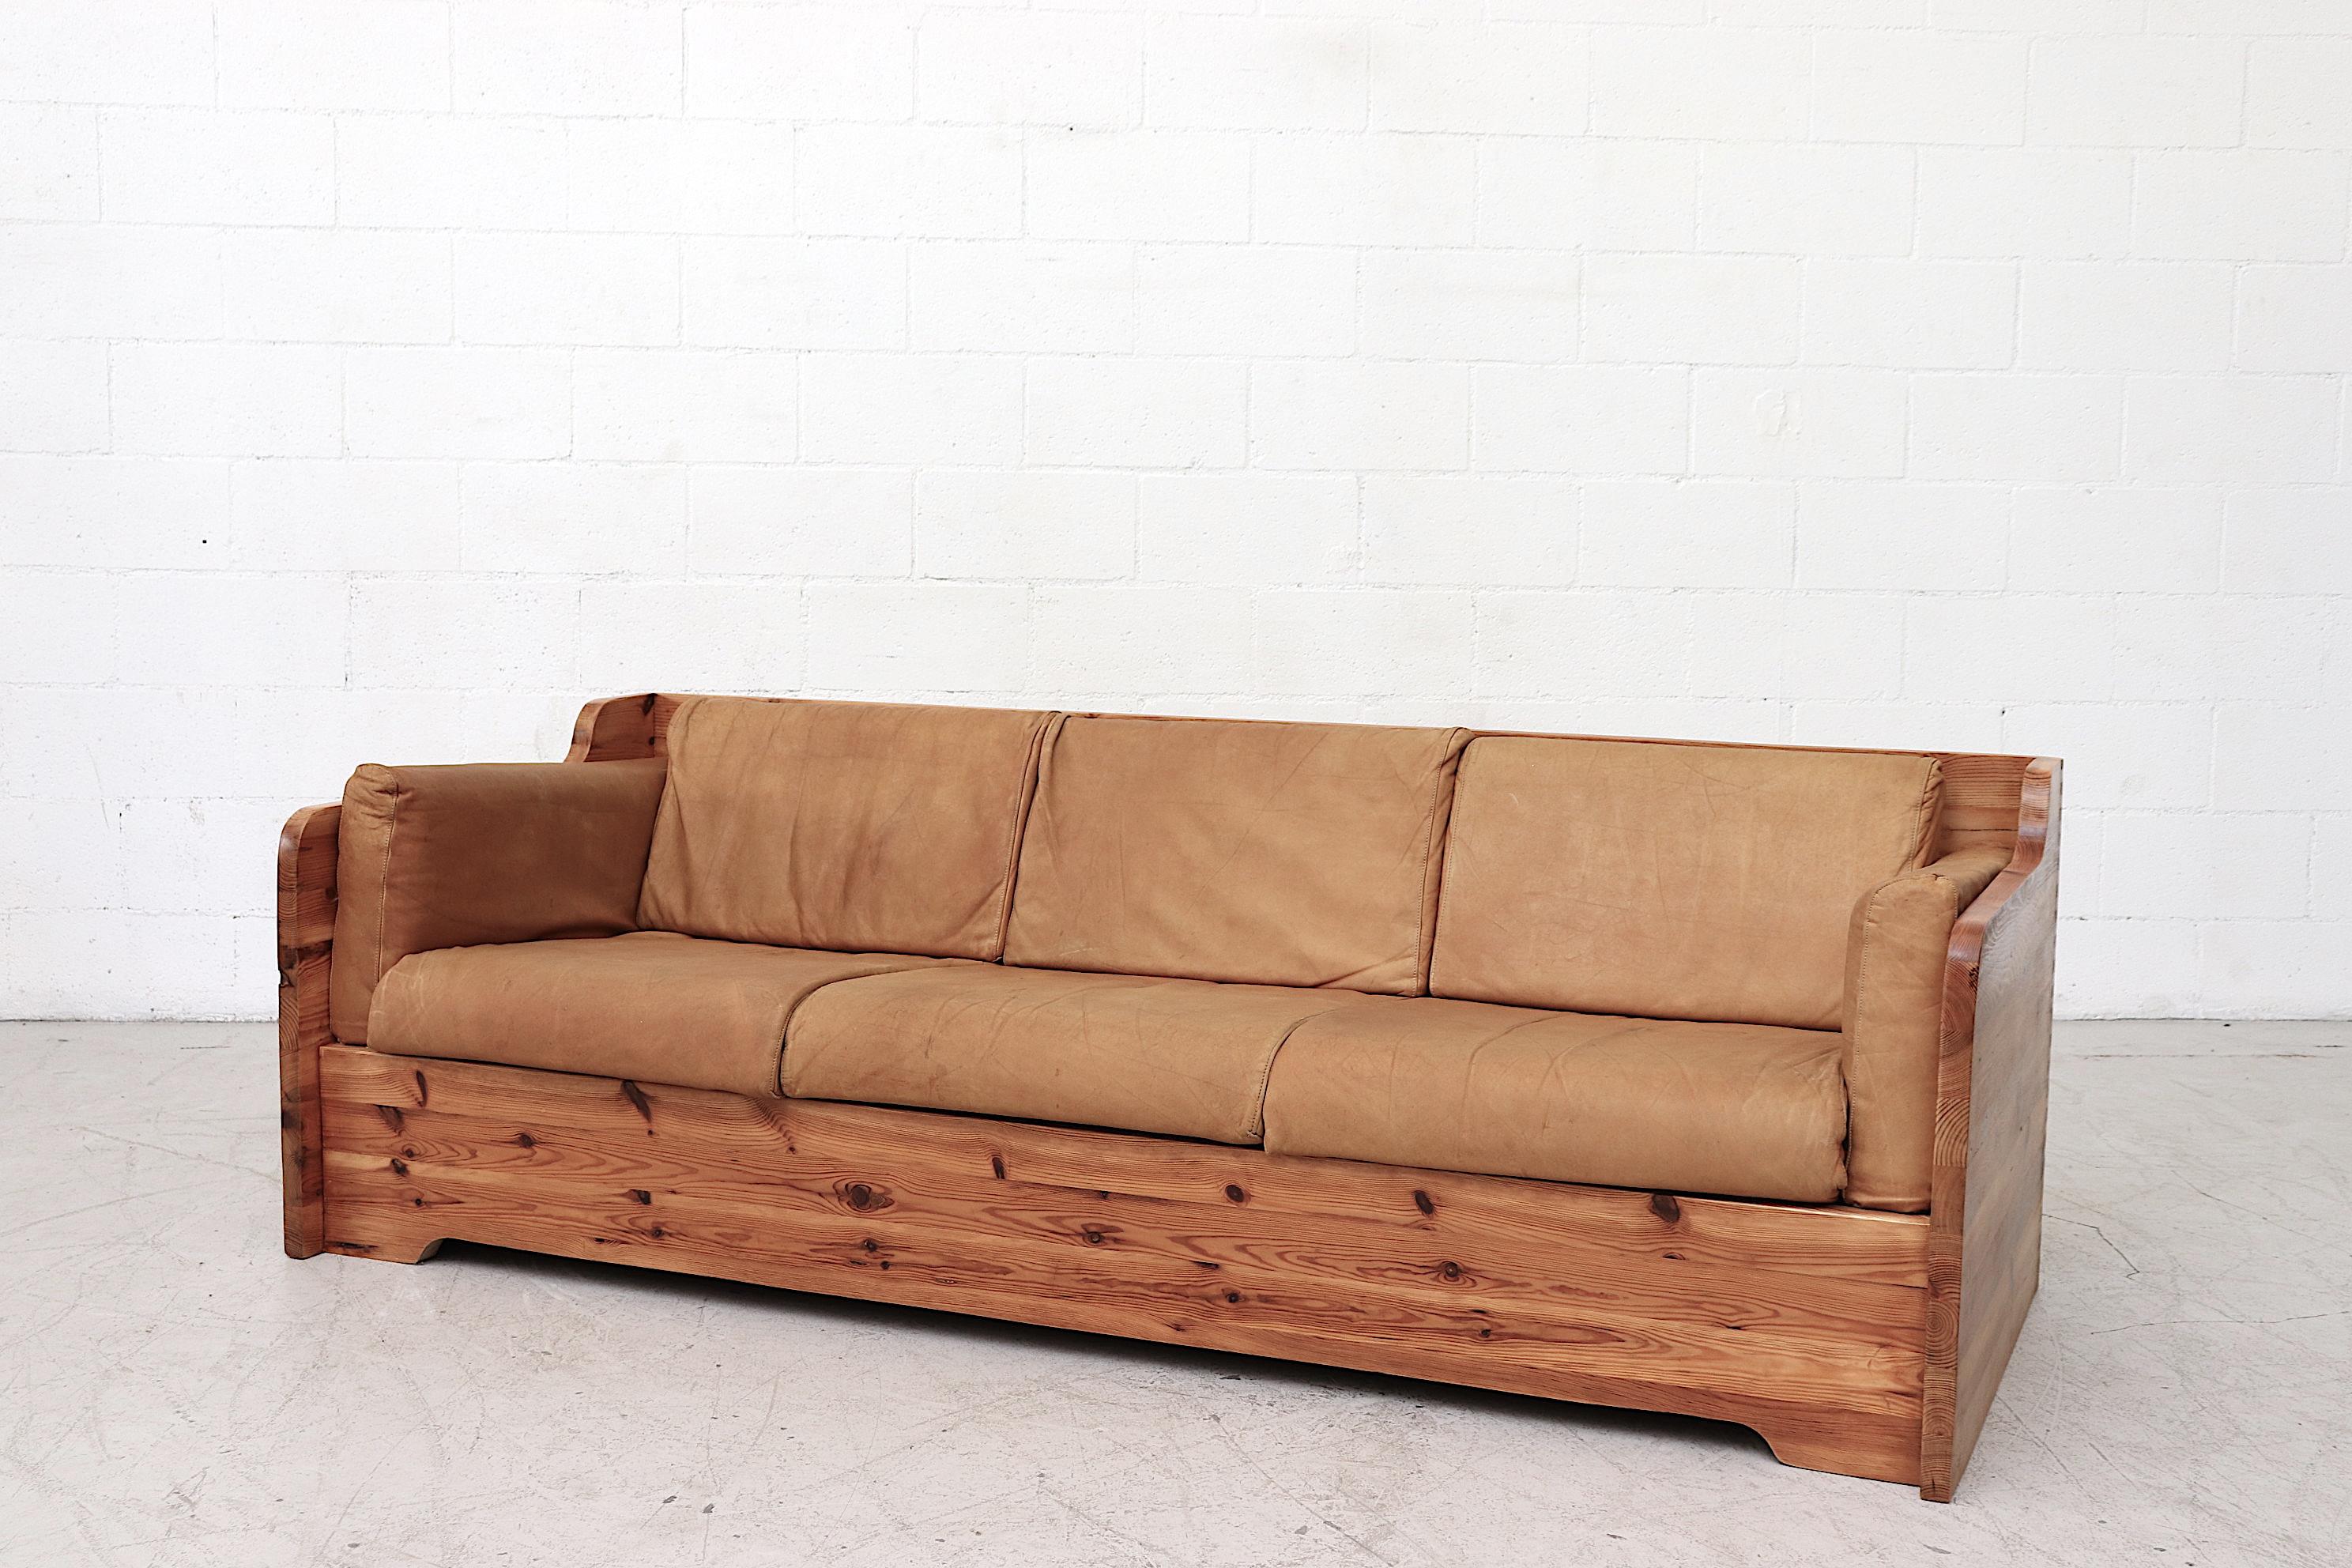 Gorgeous 3-seat sofa with natural leather cushions and solid pine crate frame. Frame and leather are in original condition with slat support. Visible wear with some fading and minimal scratching but overall good condition. Wear consistent with age